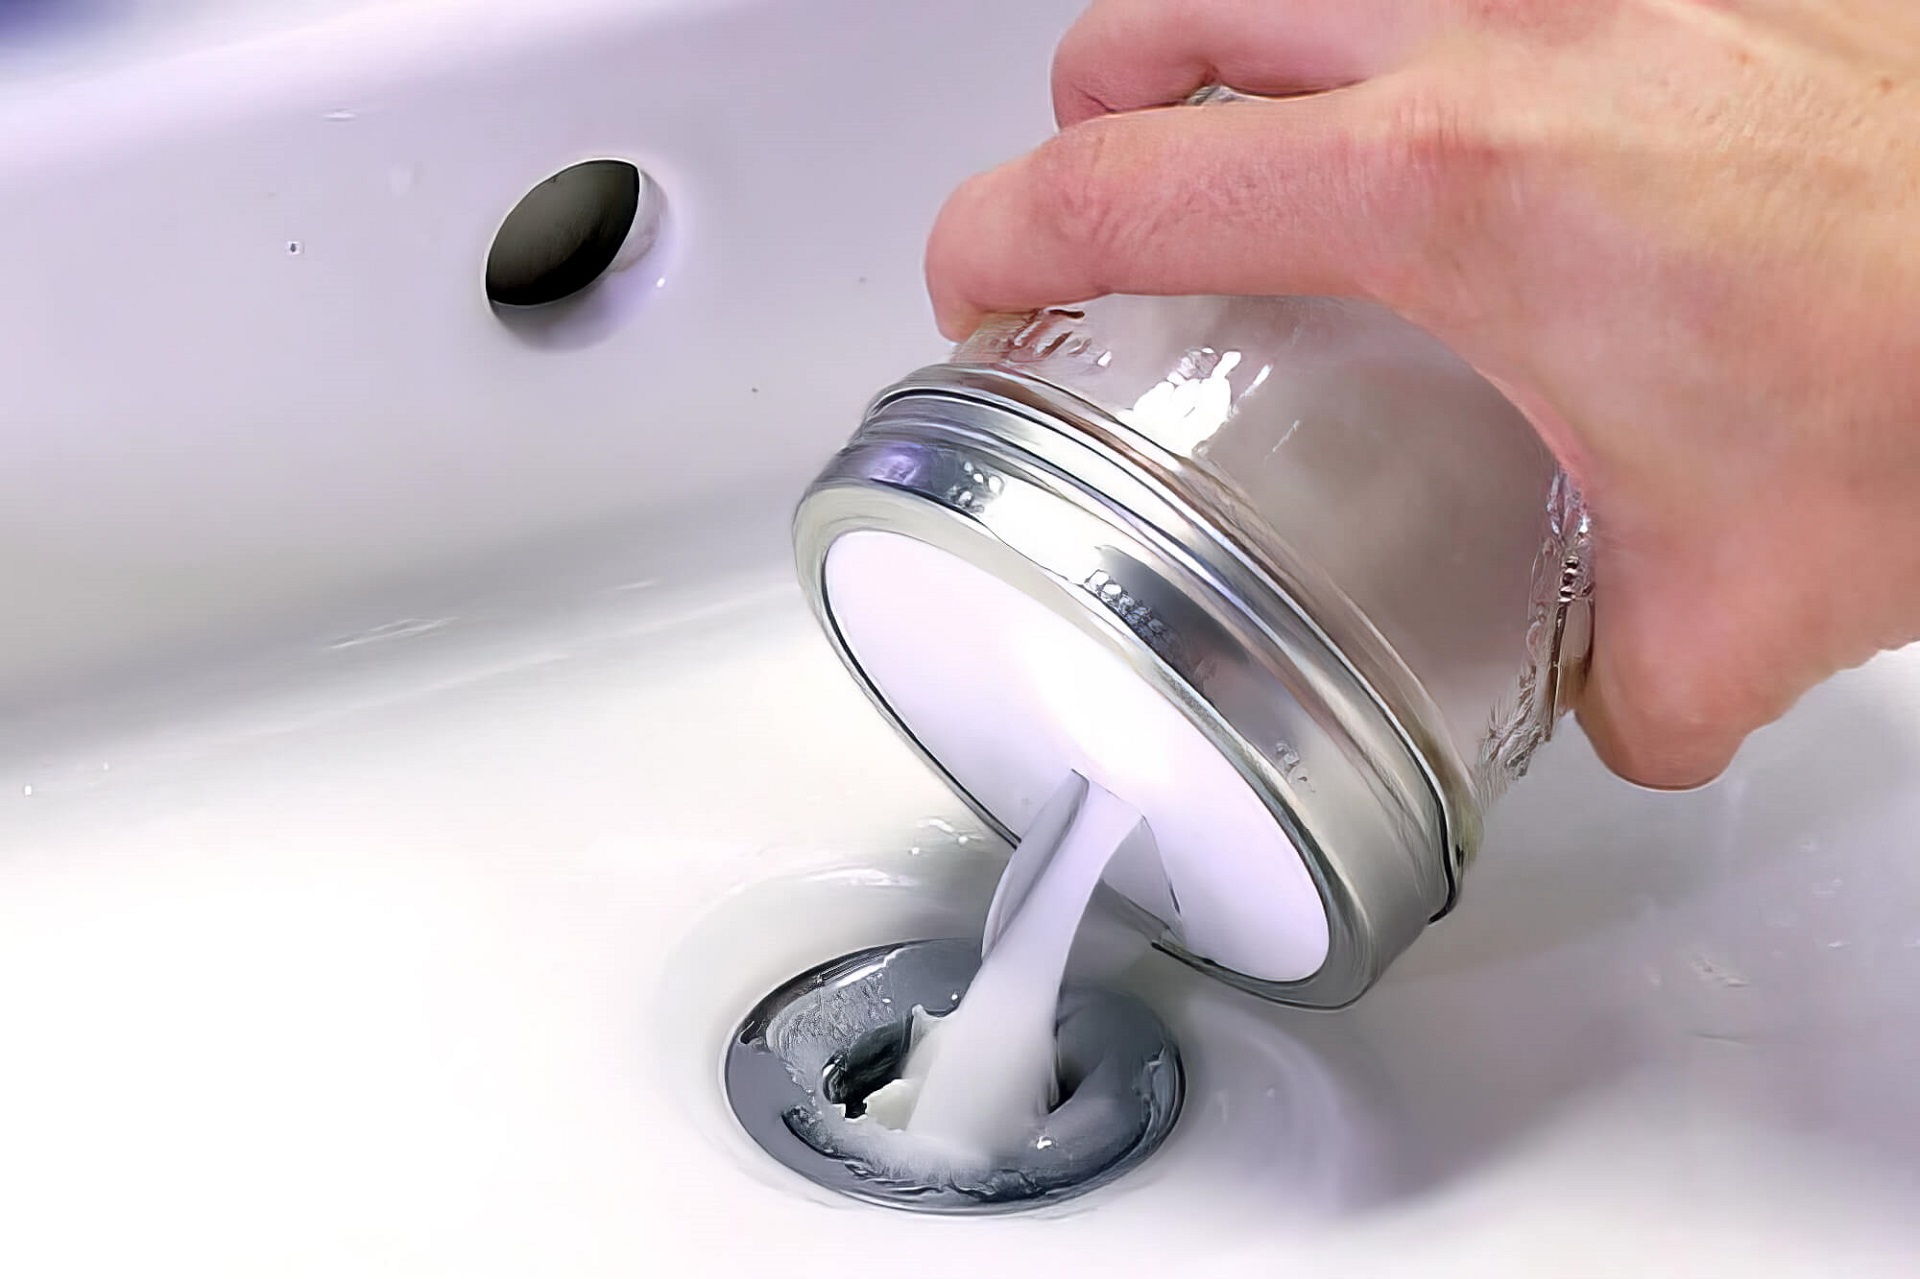 How To Clear A Clogged Sink: 6 Best DIY Tips - Gold Coast Plumbing